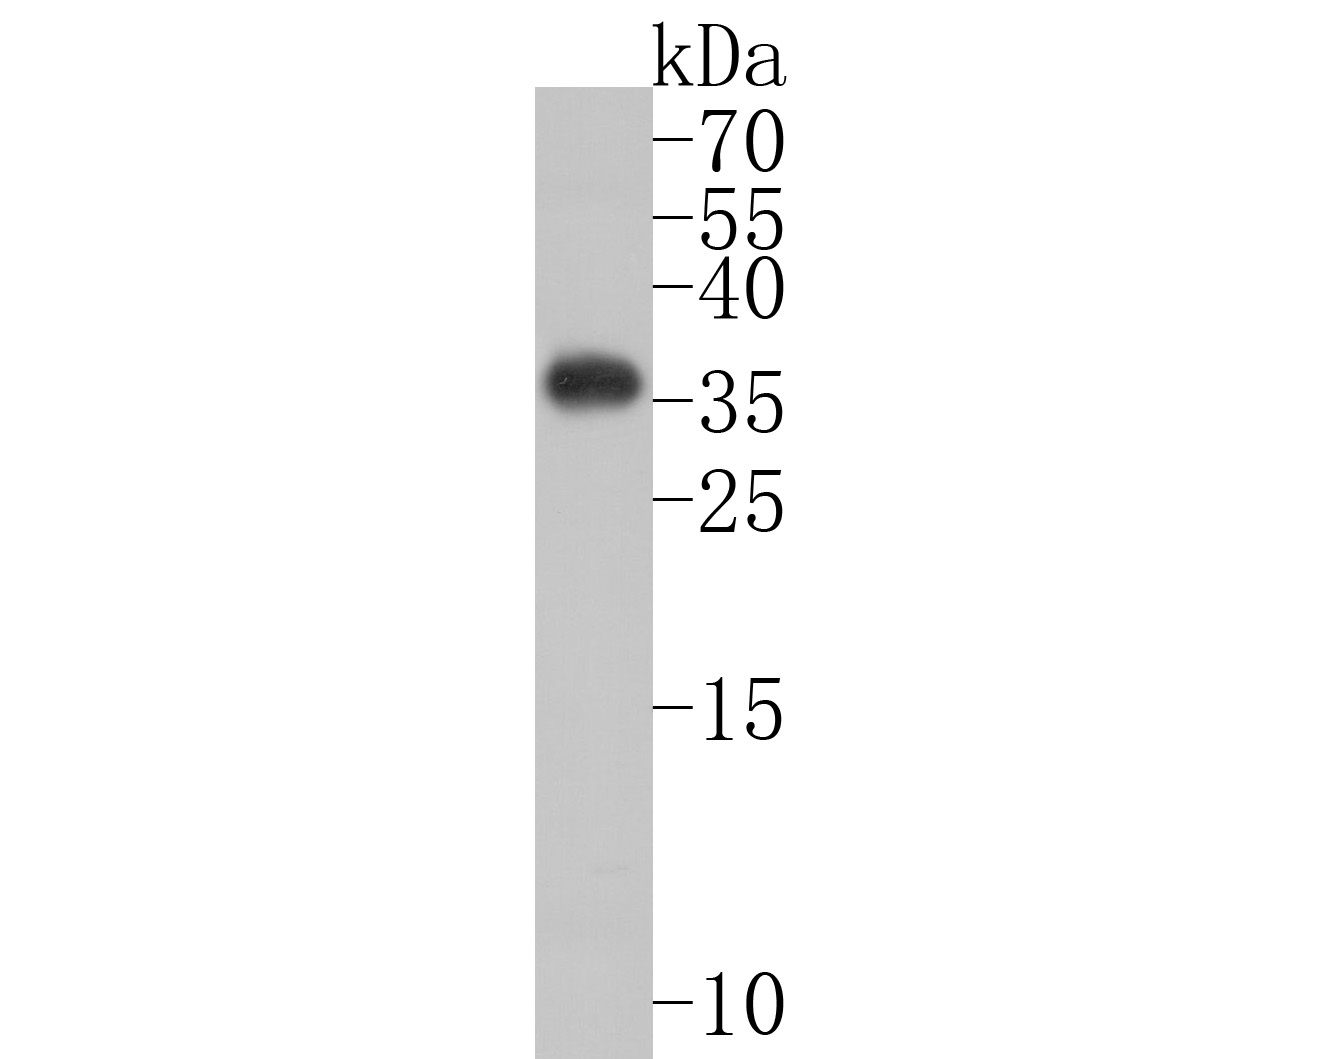 Western blot analysis of Renilla Luciferase on luciferase recombinant protein. Proteins were transferred to a PVDF membrane and blocked with 5% BSA in PBS for 1 hour at room temperature. The primary antibody (ET1602-45, 1/500) was used in 5% BSA at room temperature for 2 hours. Goat Anti-Rabbit IgG - HRP Secondary Antibody (HA1001) at 1:200,000 dilution was used for 1 hour at room temperature.